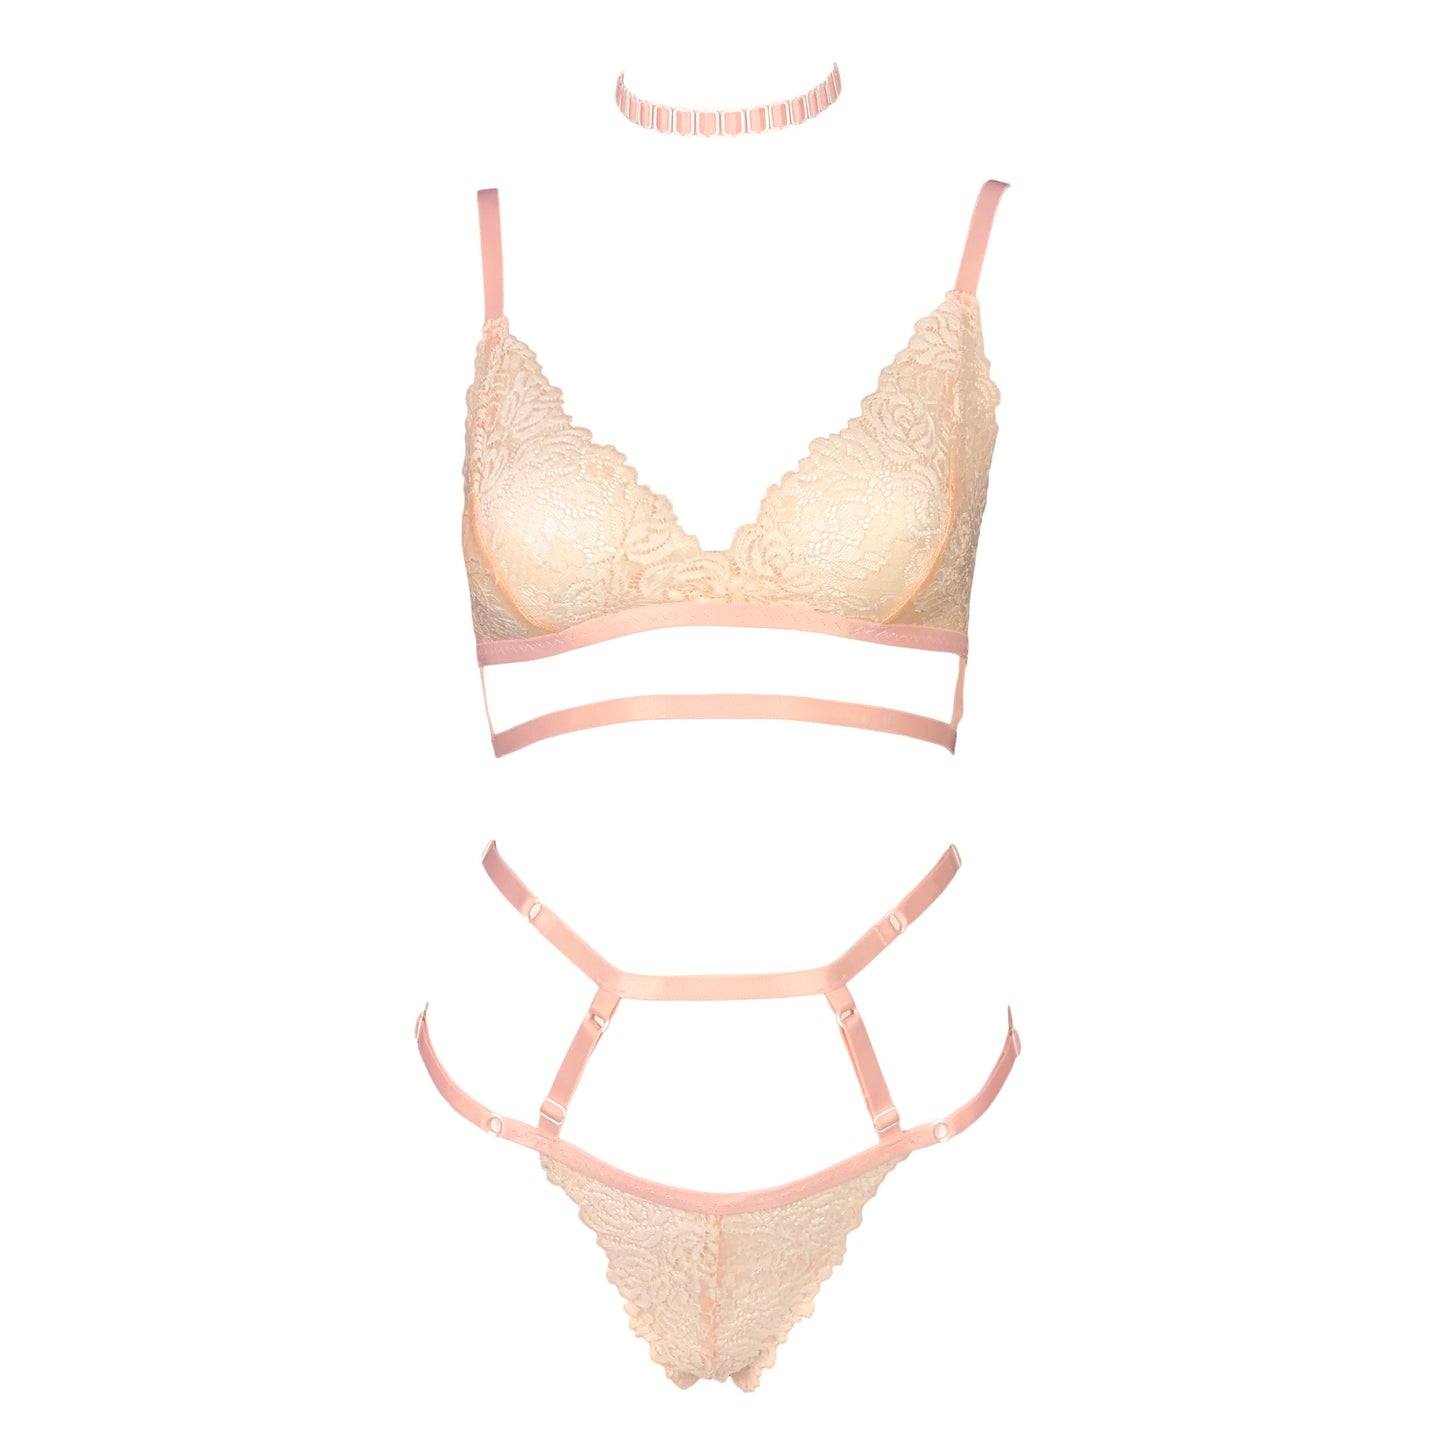 Daisy lace lingerie set in baby pink